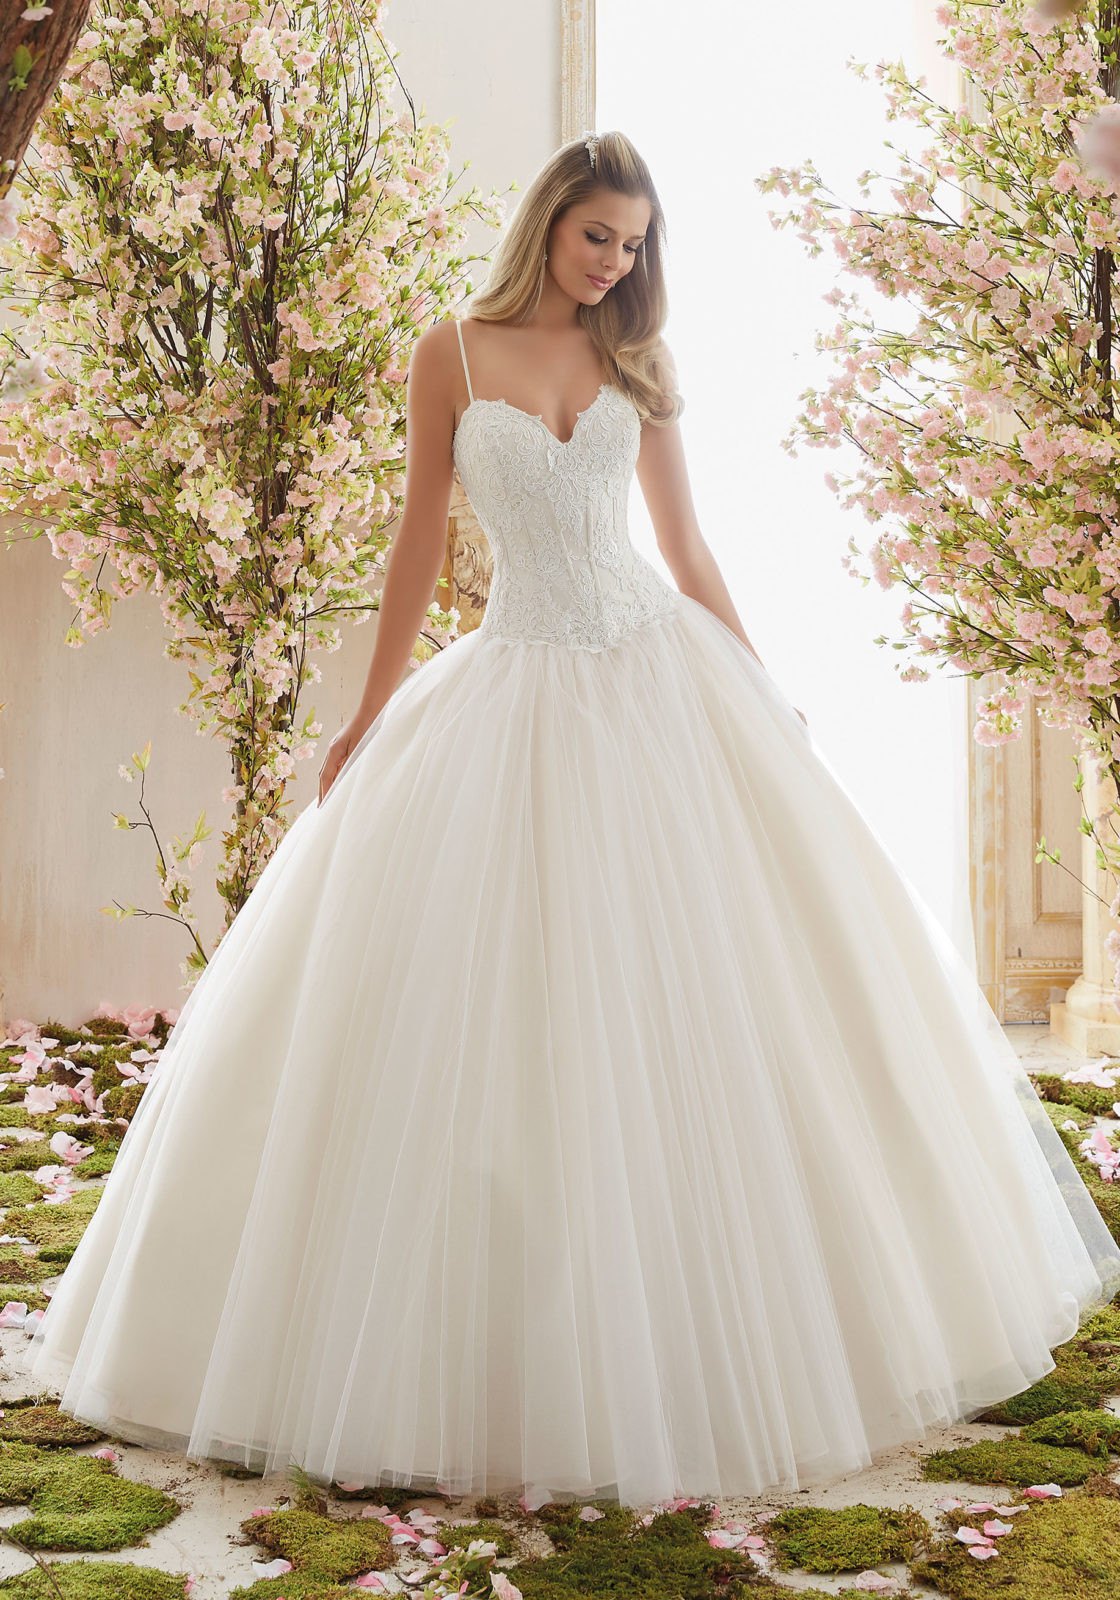 Wedding Gowns Lace
 Chantilly Lace on Tulle Ball Gown Wedding Dress